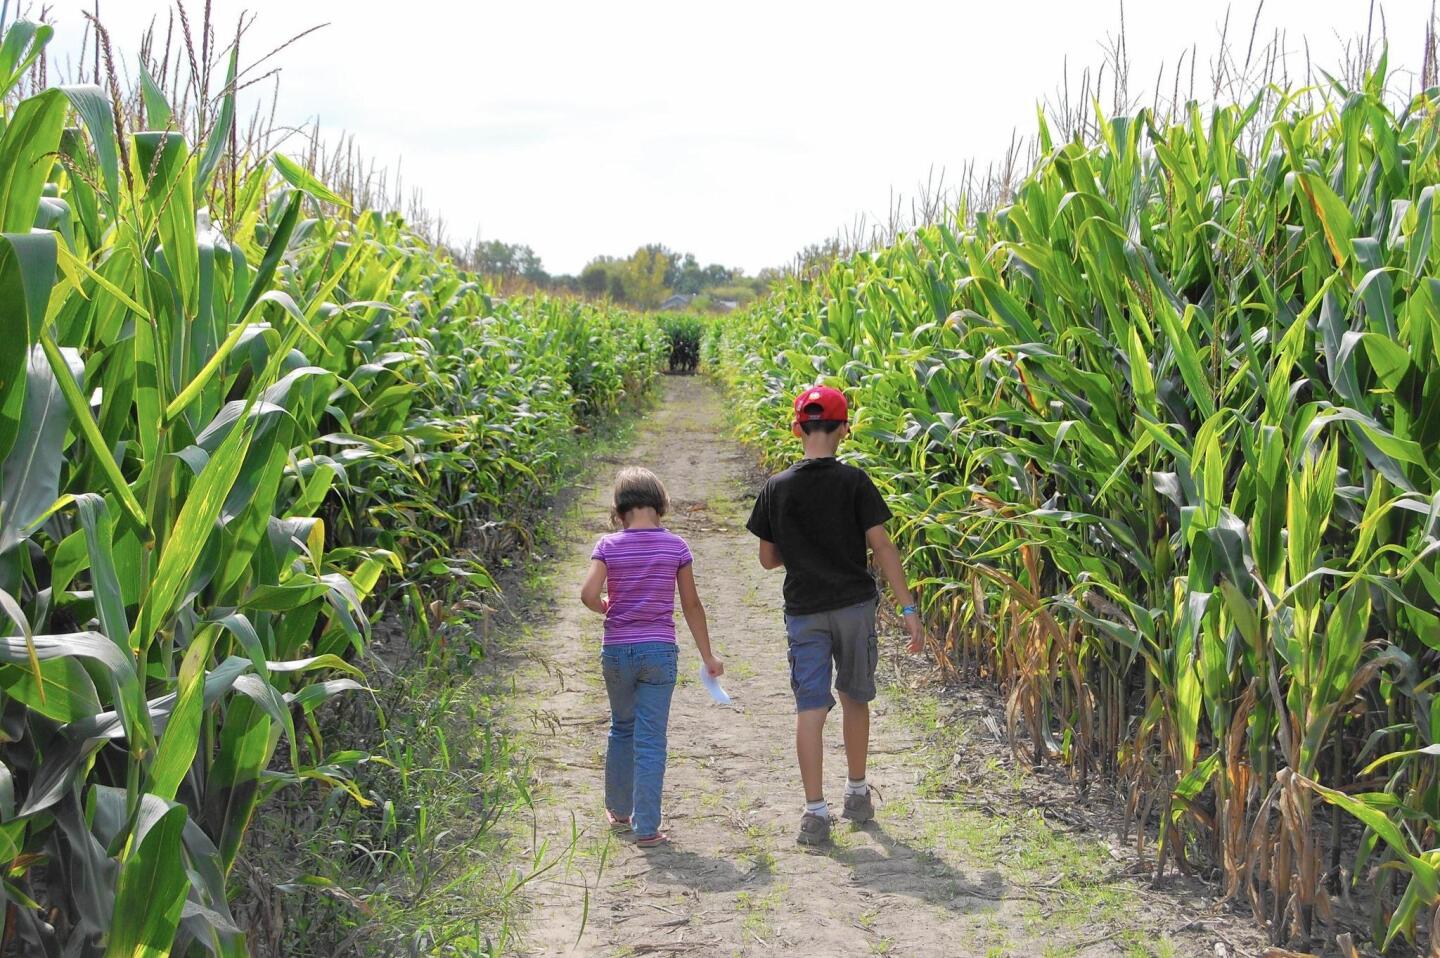 There’s no shortage of corn mazes in the Midwest, and kids — as well as adults — get a kick out of finding their way through them.